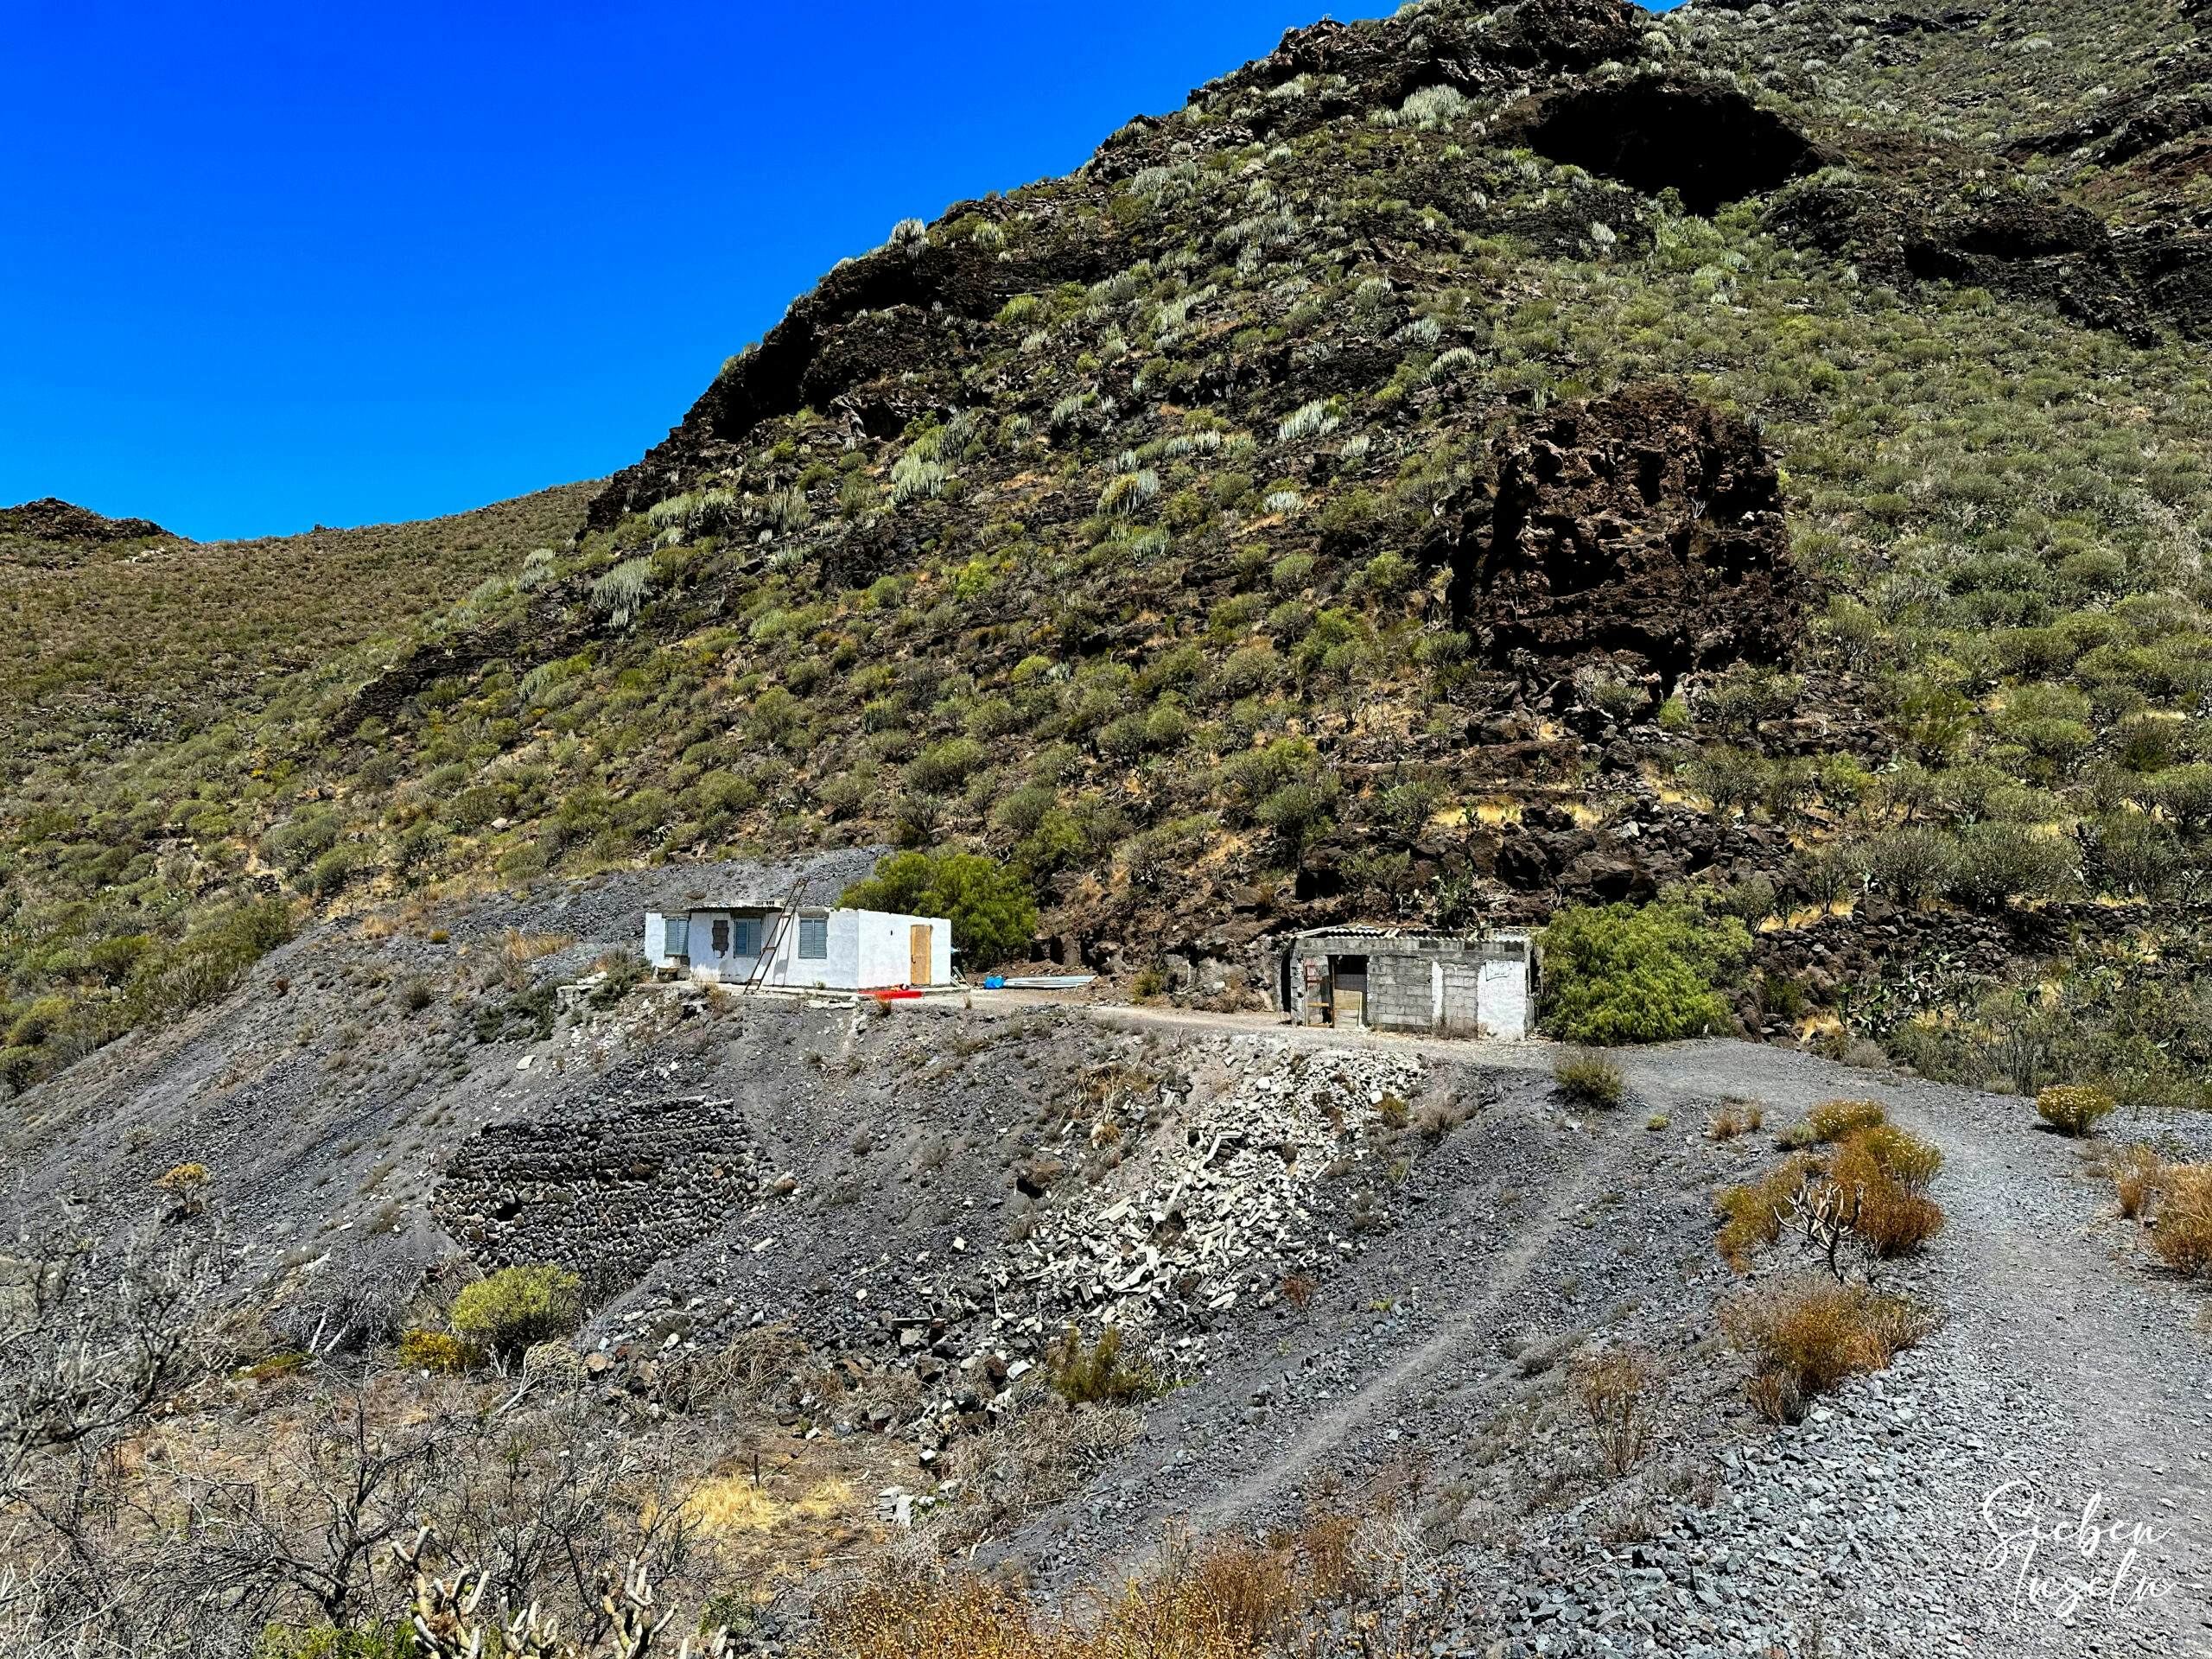 The new cottages at the entrance of the middle Tamaimo tunnel